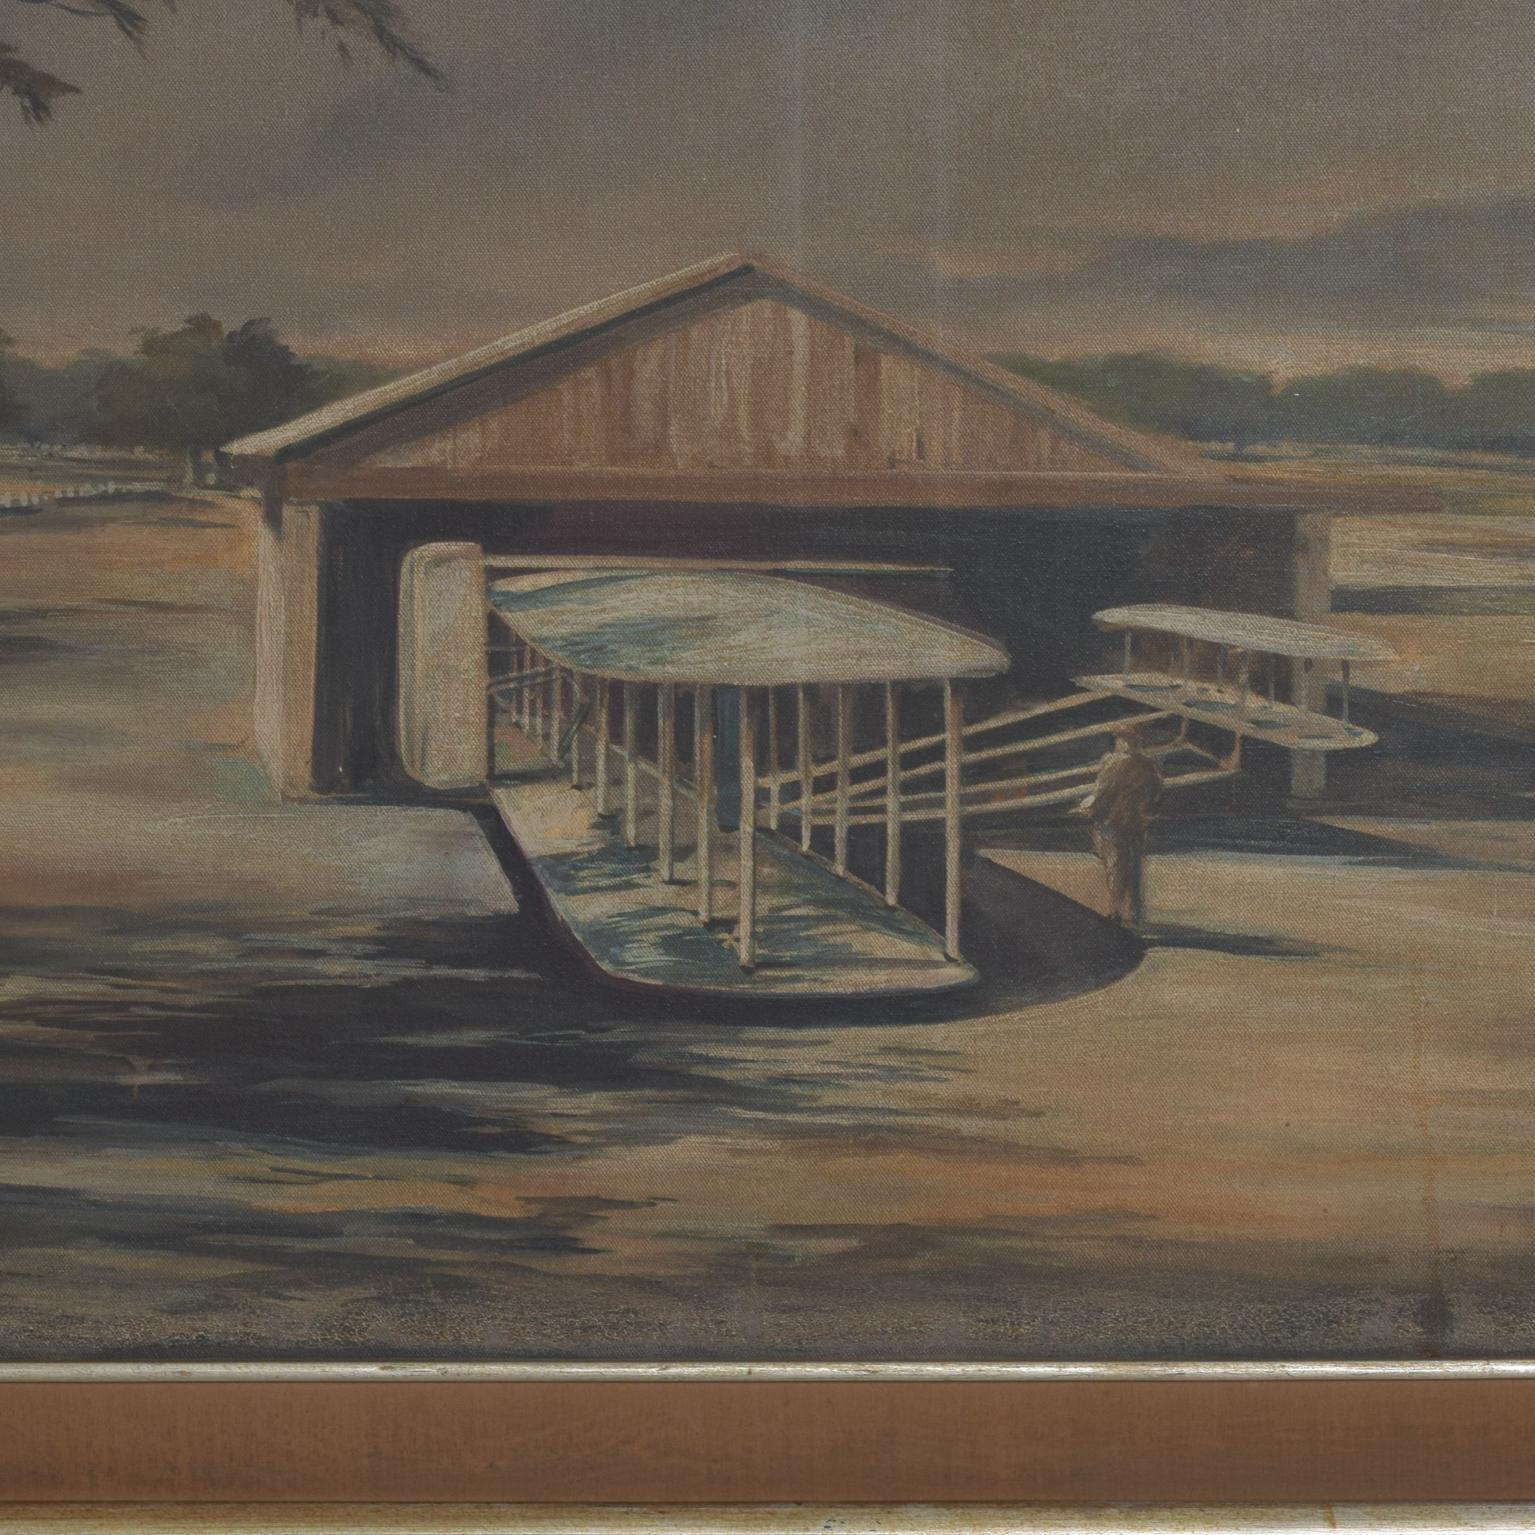 Airplane Hangar painting in oil on canvas, framed.
Vintage Mid-Century Modern aviation art. 
No further information available at this time.
42 x 30 .5 H x 1 D, Art 34.75 x 23 1/8 H
Original vintage unrestored condition, see all images